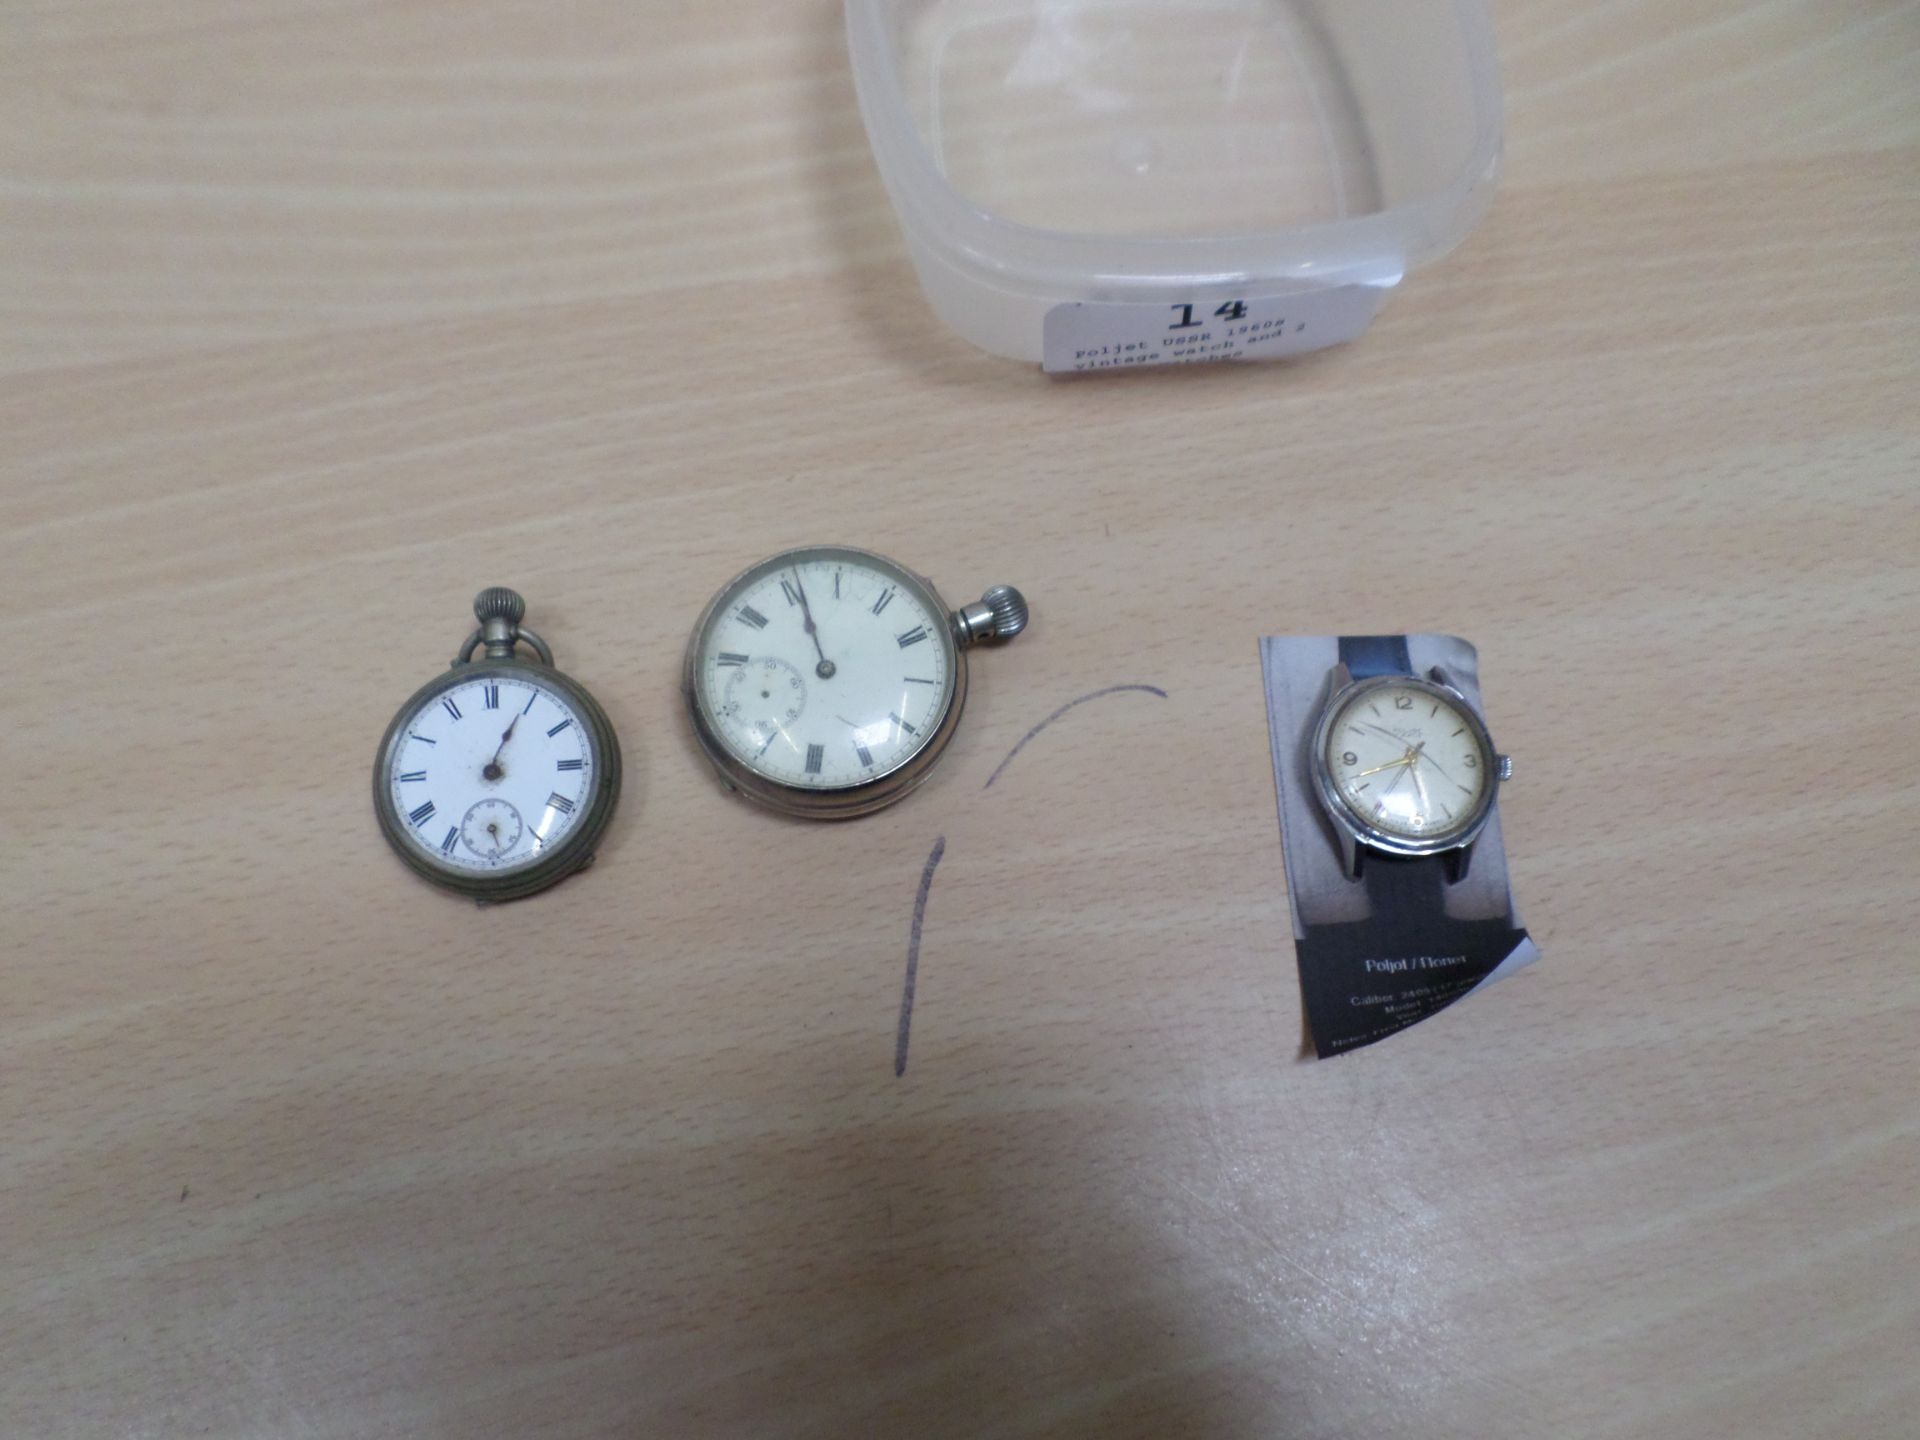 Poljet USSR 1960s vintage watch and 2 pocket watches